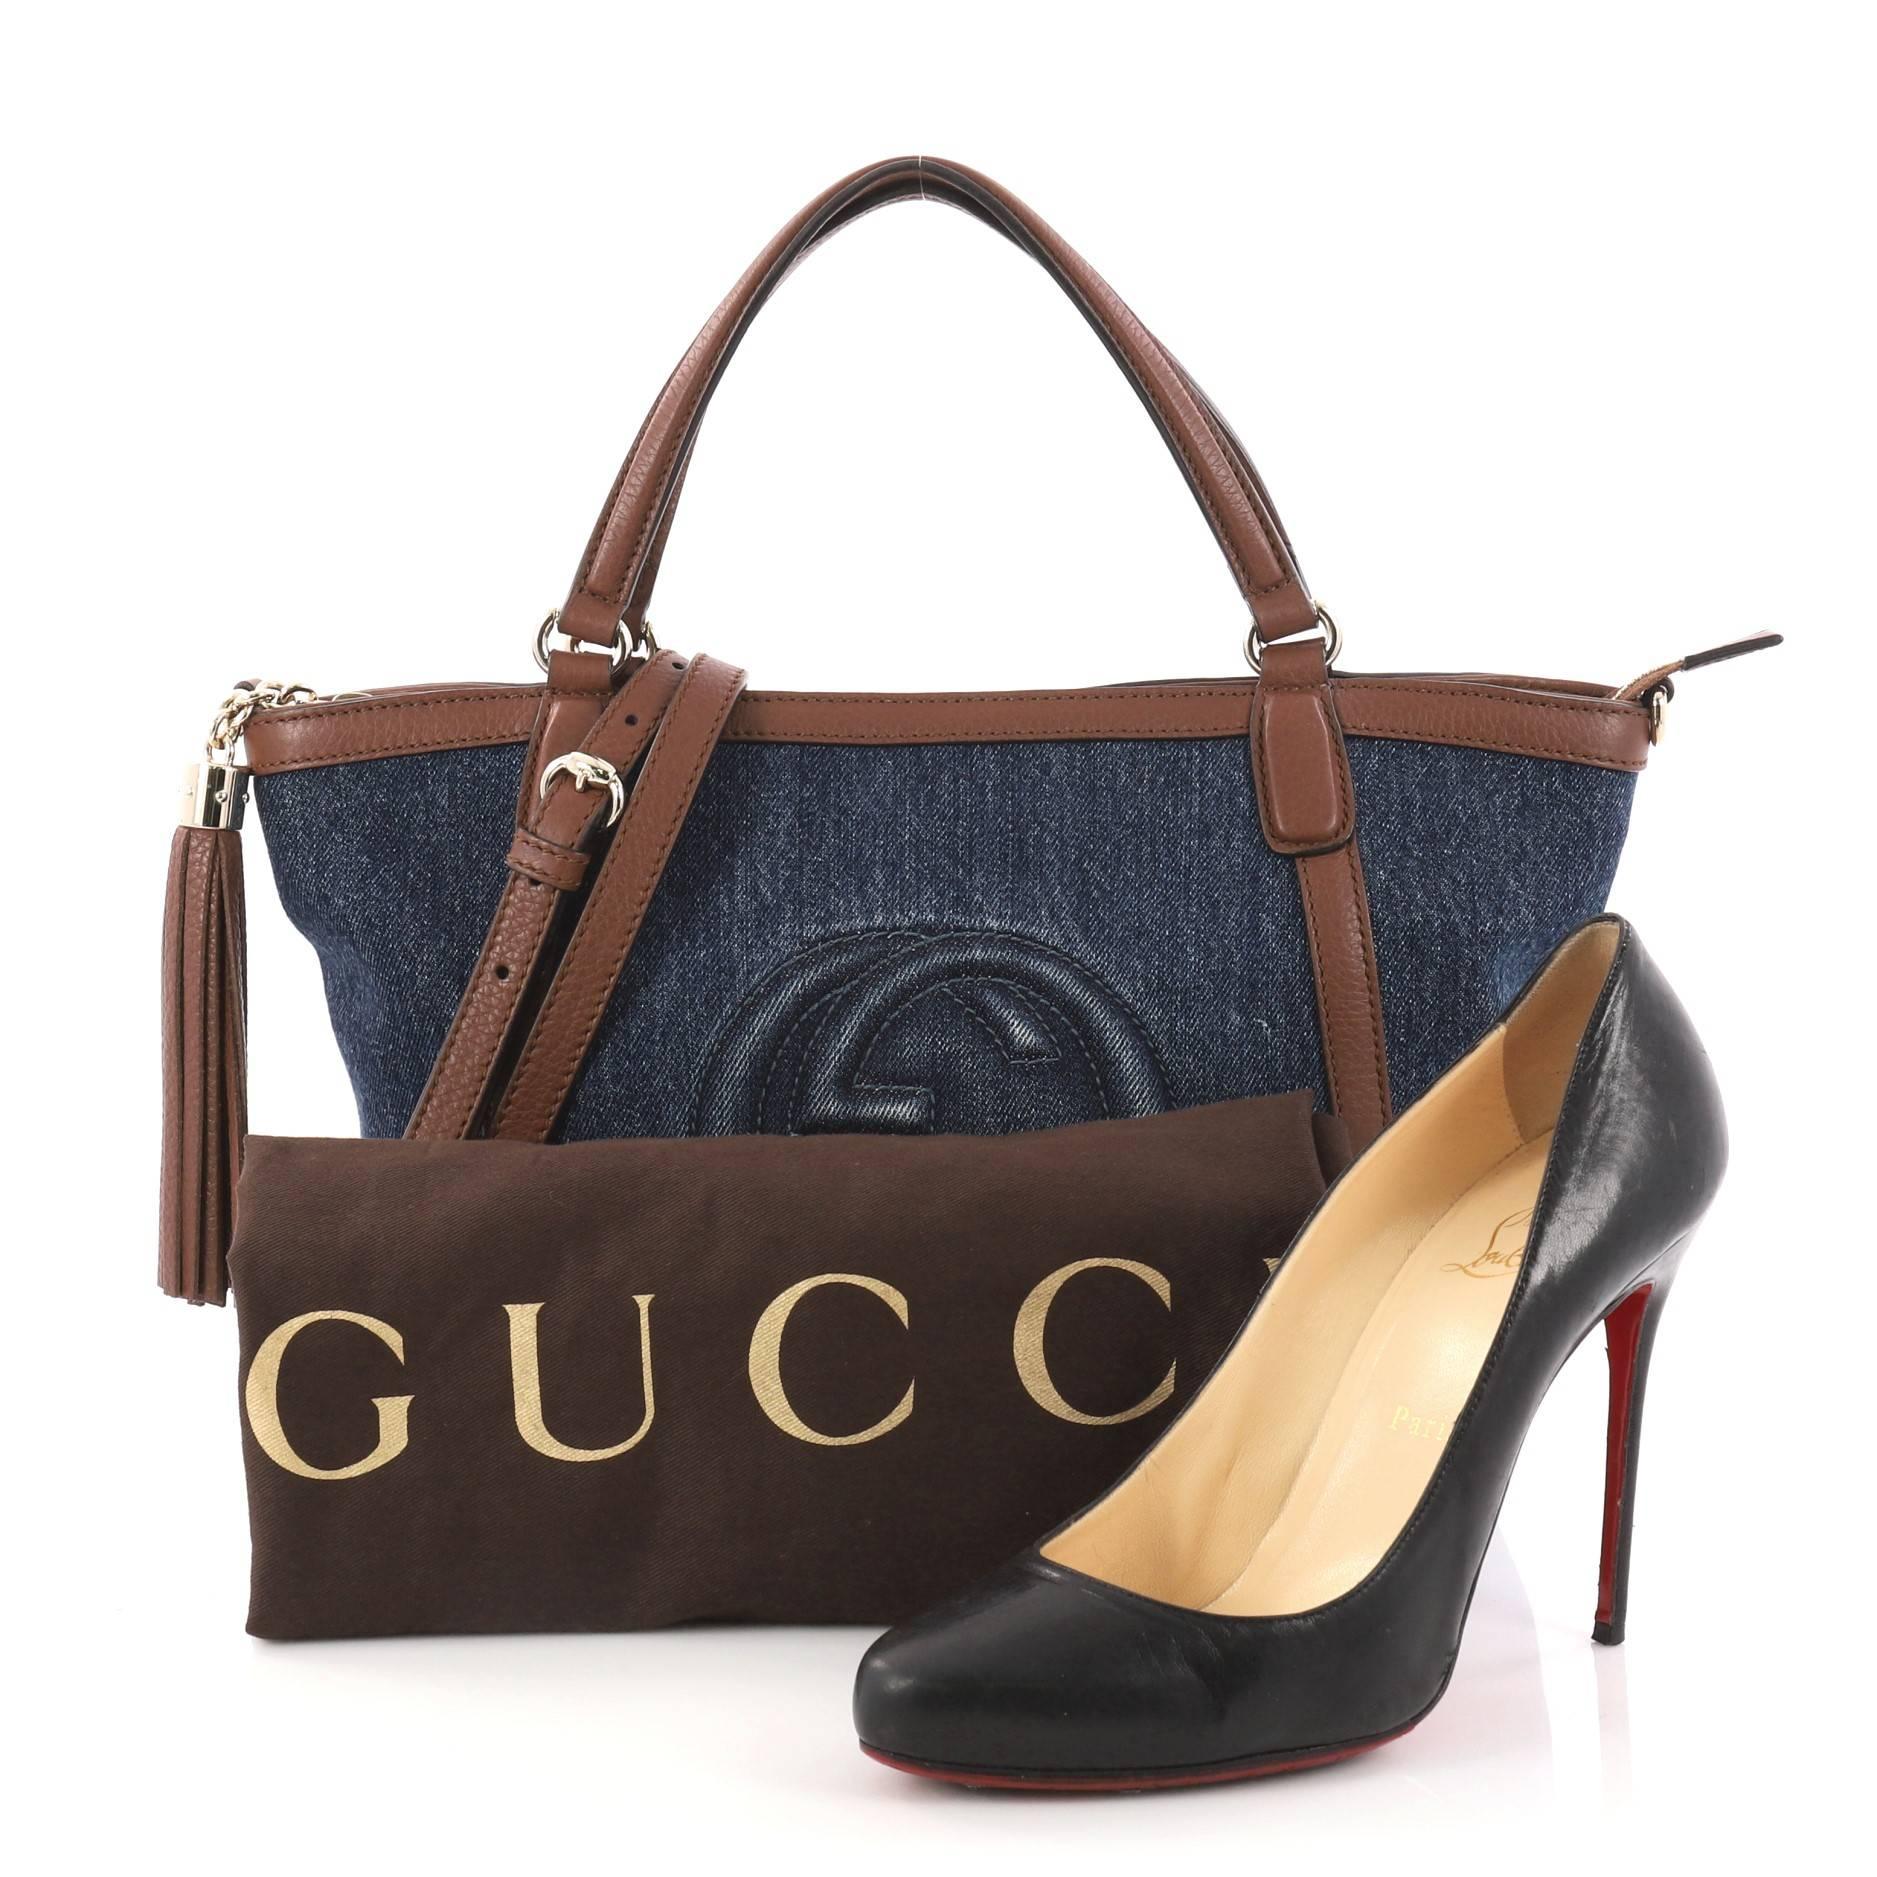 This authentic Gucci Soho Convertible Top Handle Bag Denim Small is a fresh, casual-chic tote made for everyday excursions. Crafted from navy denim with brown leather trims, this no-fuss tote features Gucci's signature interlocking GG logo stitched